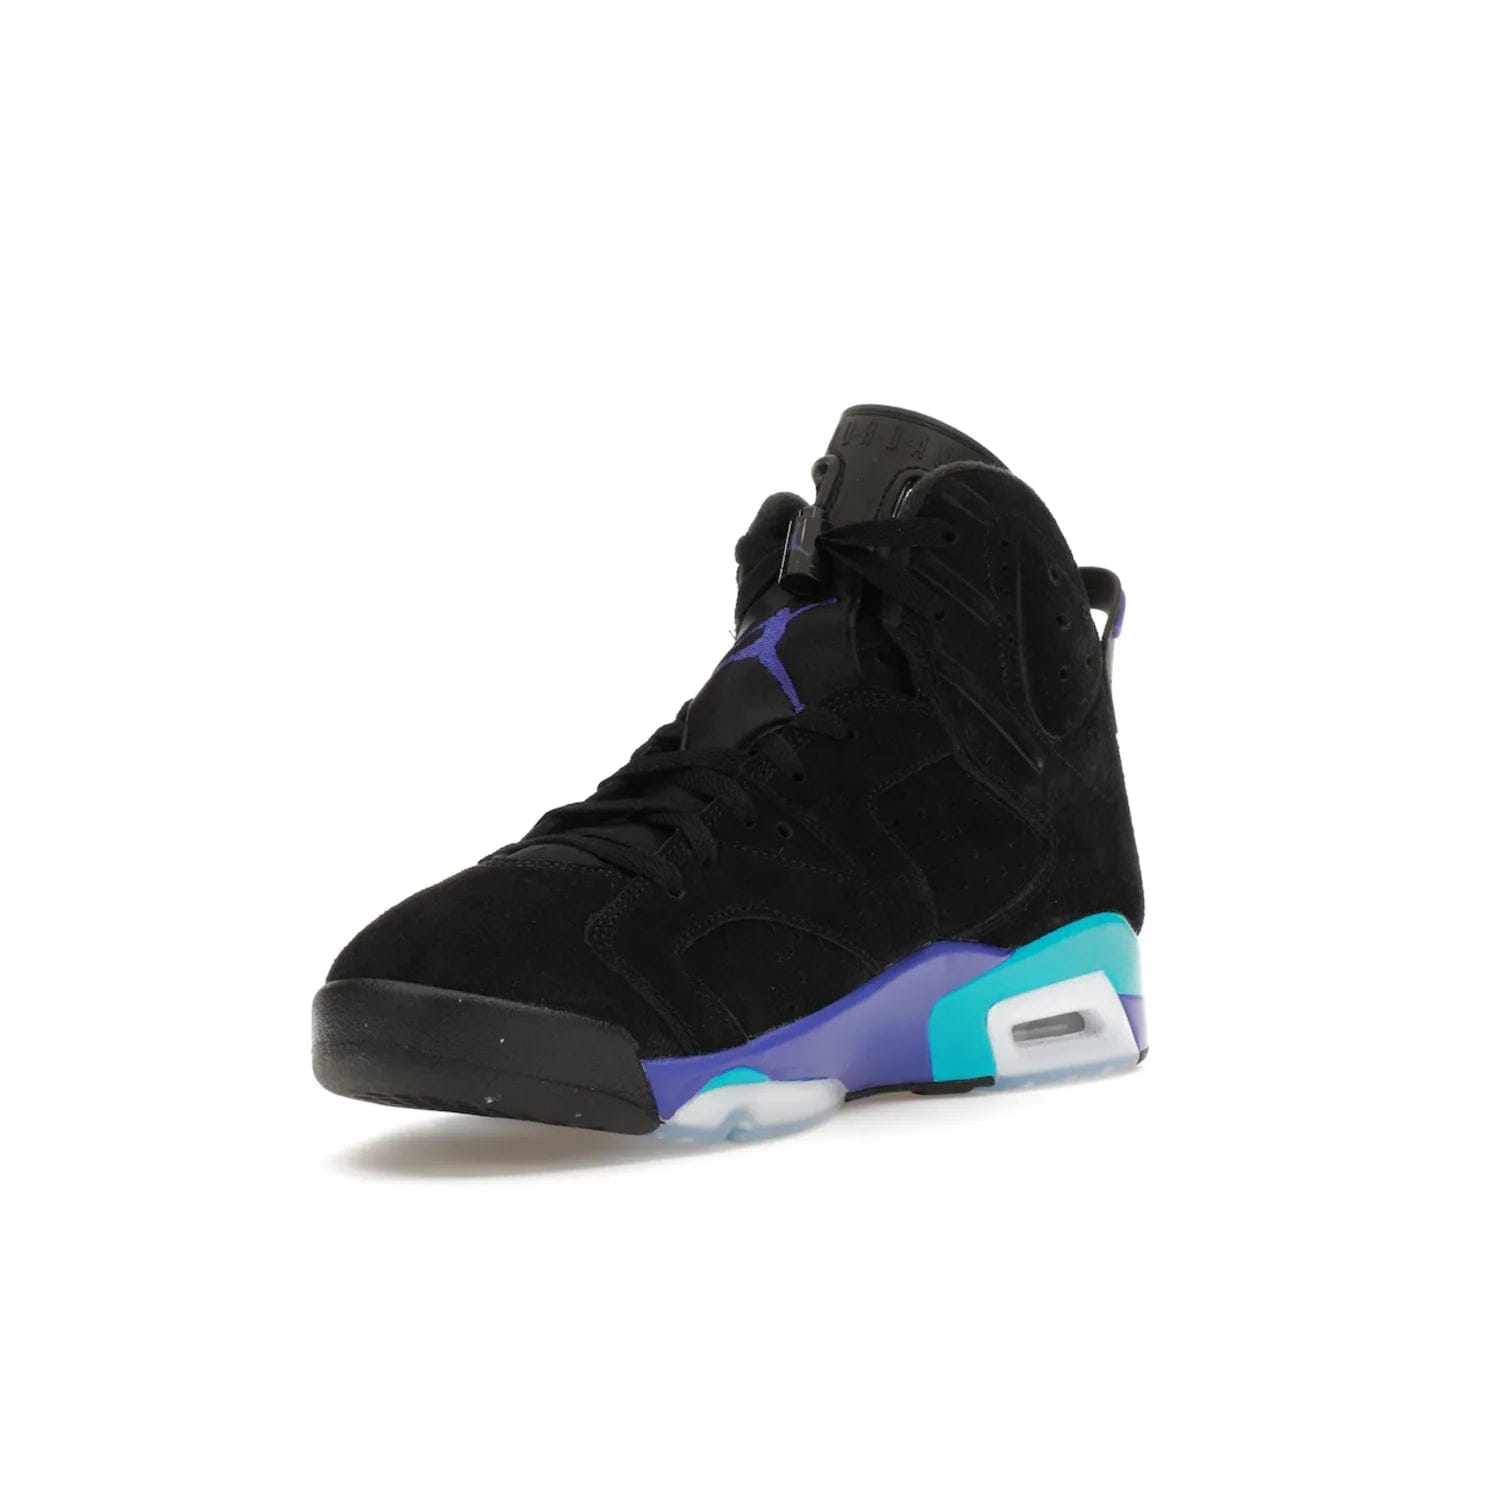 Jordan 6 Retro Aqua - Image 14 - Only at www.BallersClubKickz.com - Feel the classic Jordan 6 Retro Aqua paired with modern style. Black, Bright Concord, and Aquatone hues are crafted with a supple suede and rubberized heel tab. This standout sneaker adds signature Jordan elements at $200. Elevate your style with the Jordan 6 Retro Aqua.